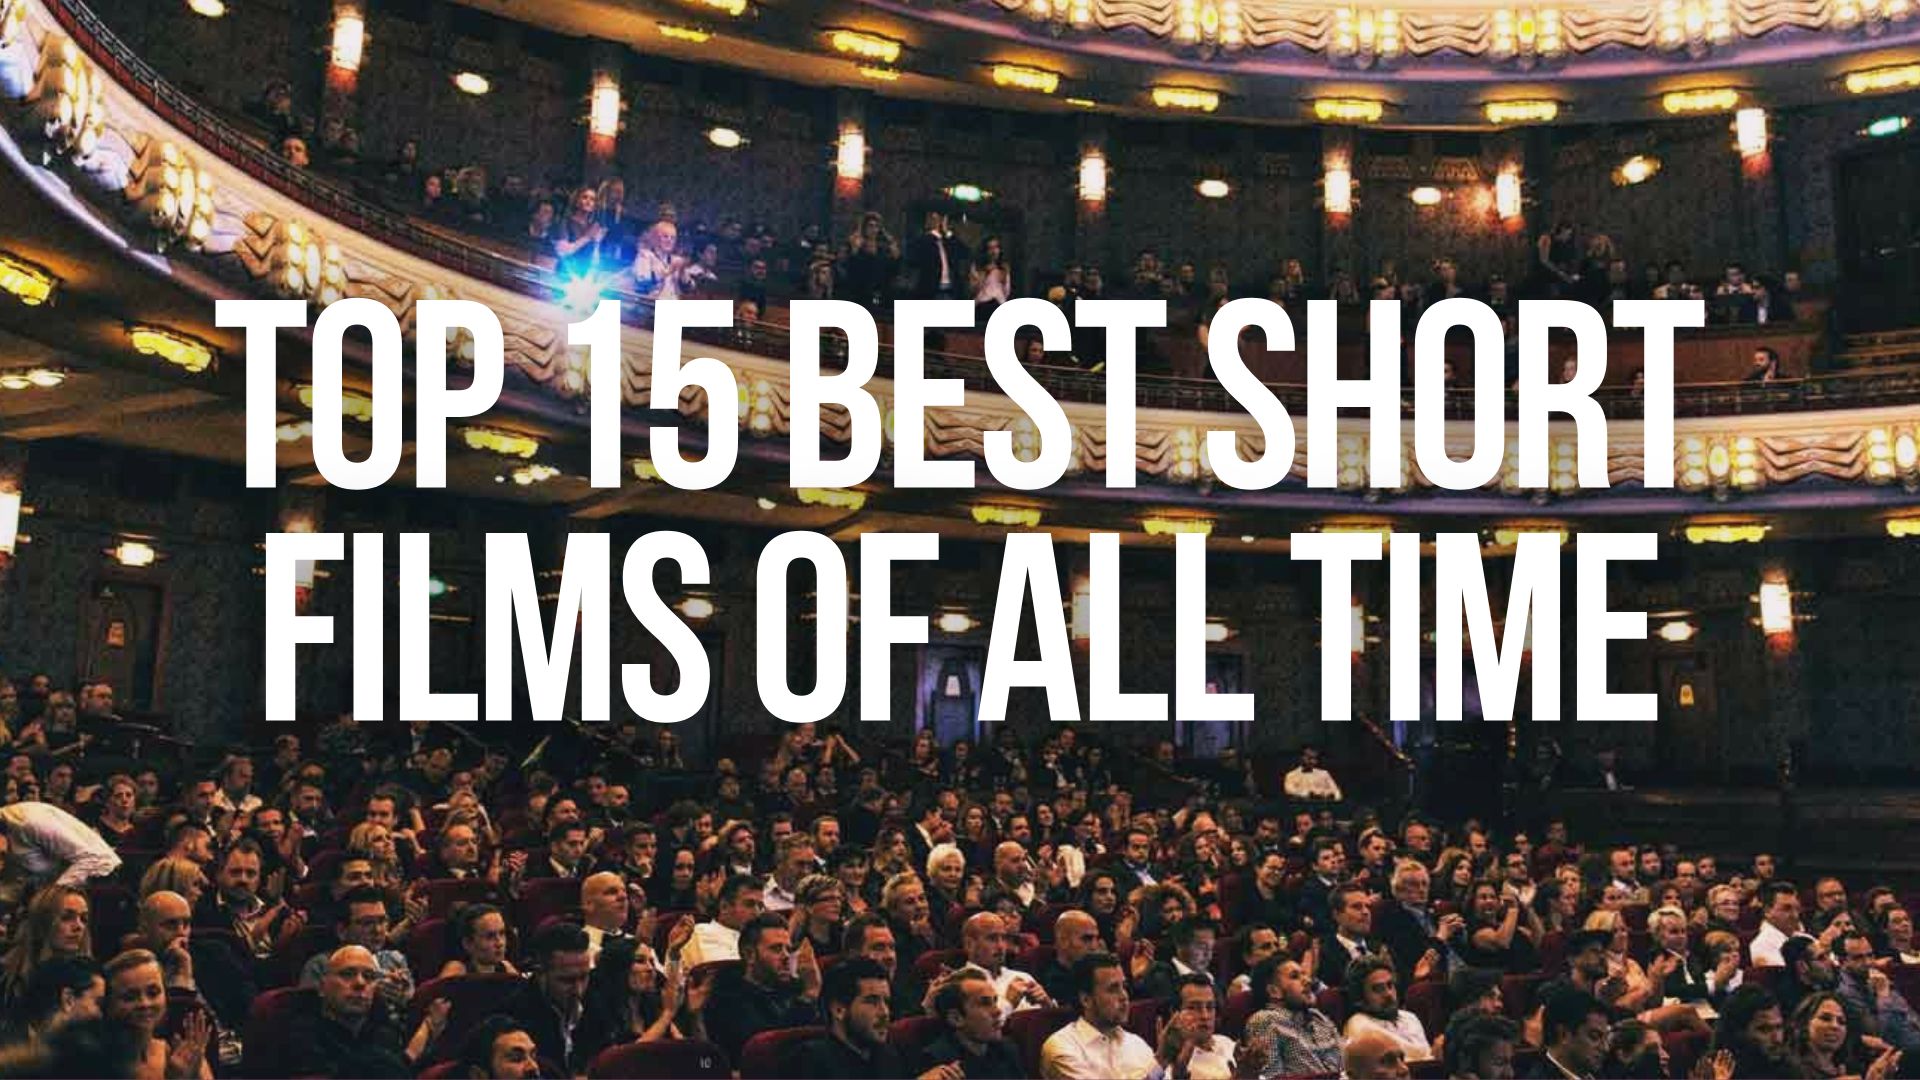 Top 15 Best Short Films of All Time